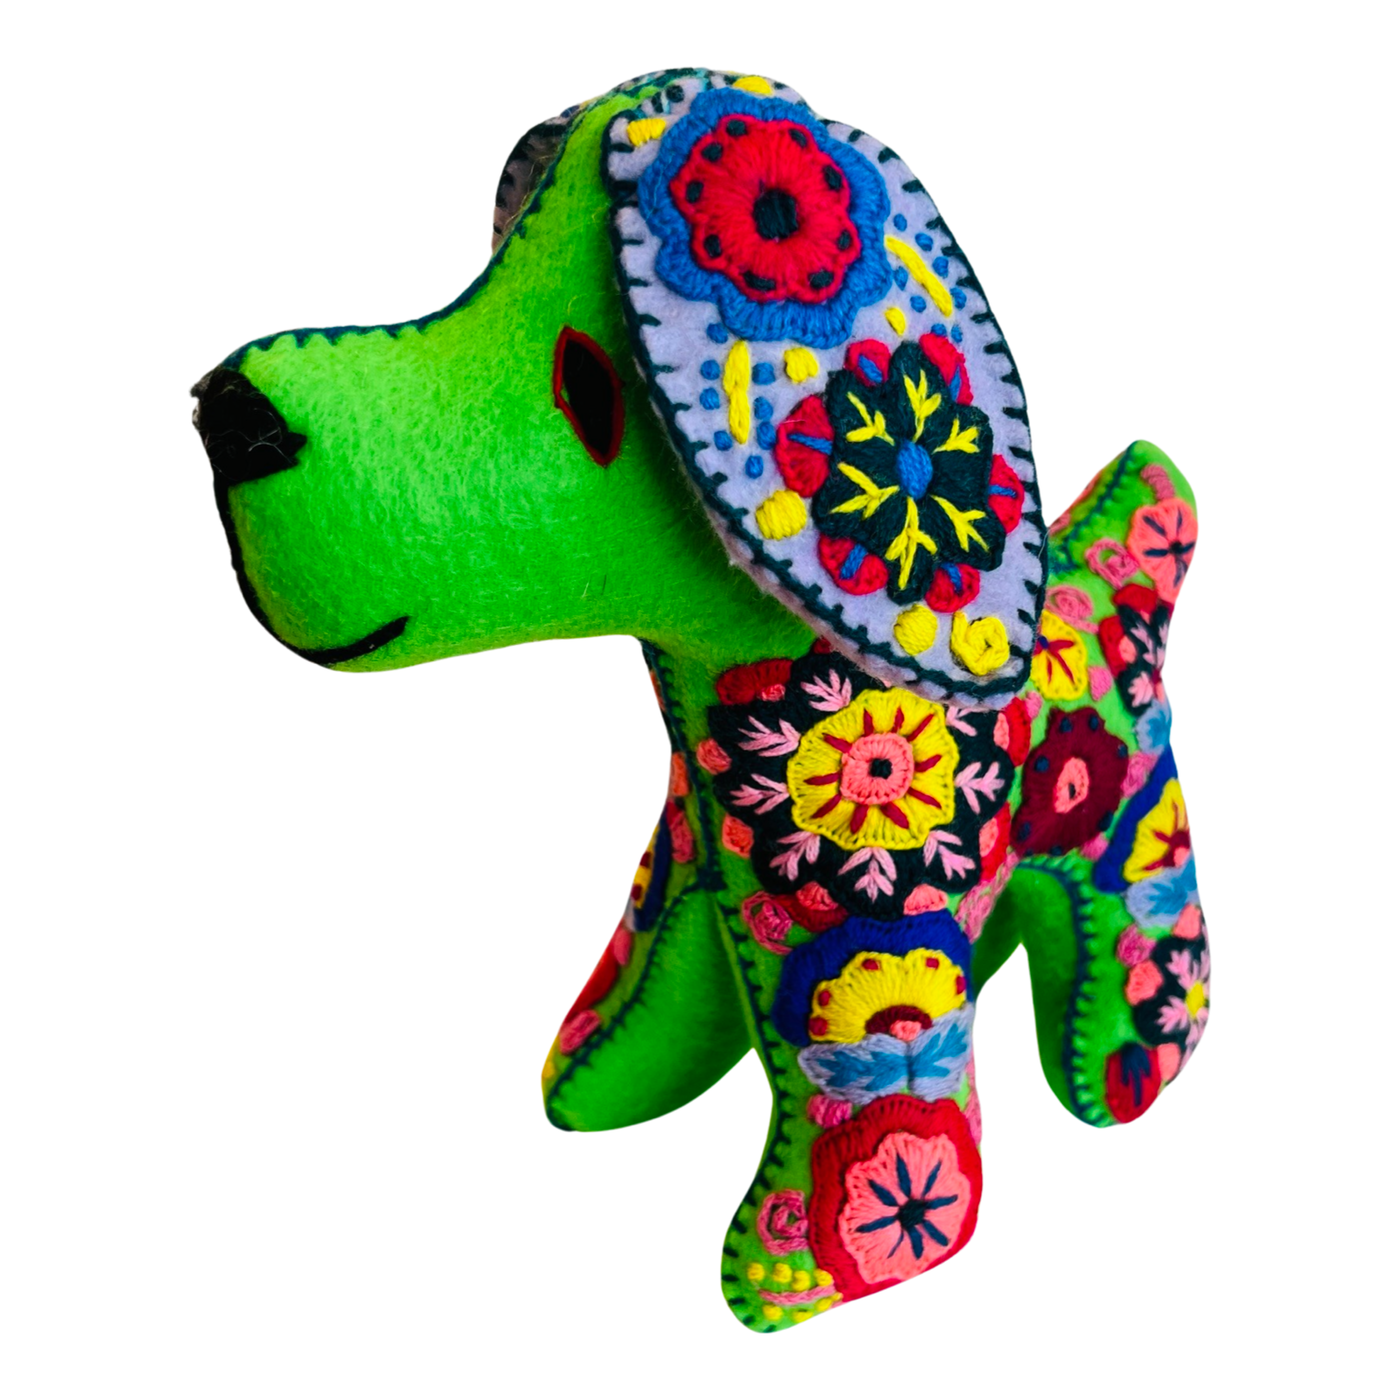 side view of an embroidered green dog with colorful flowers